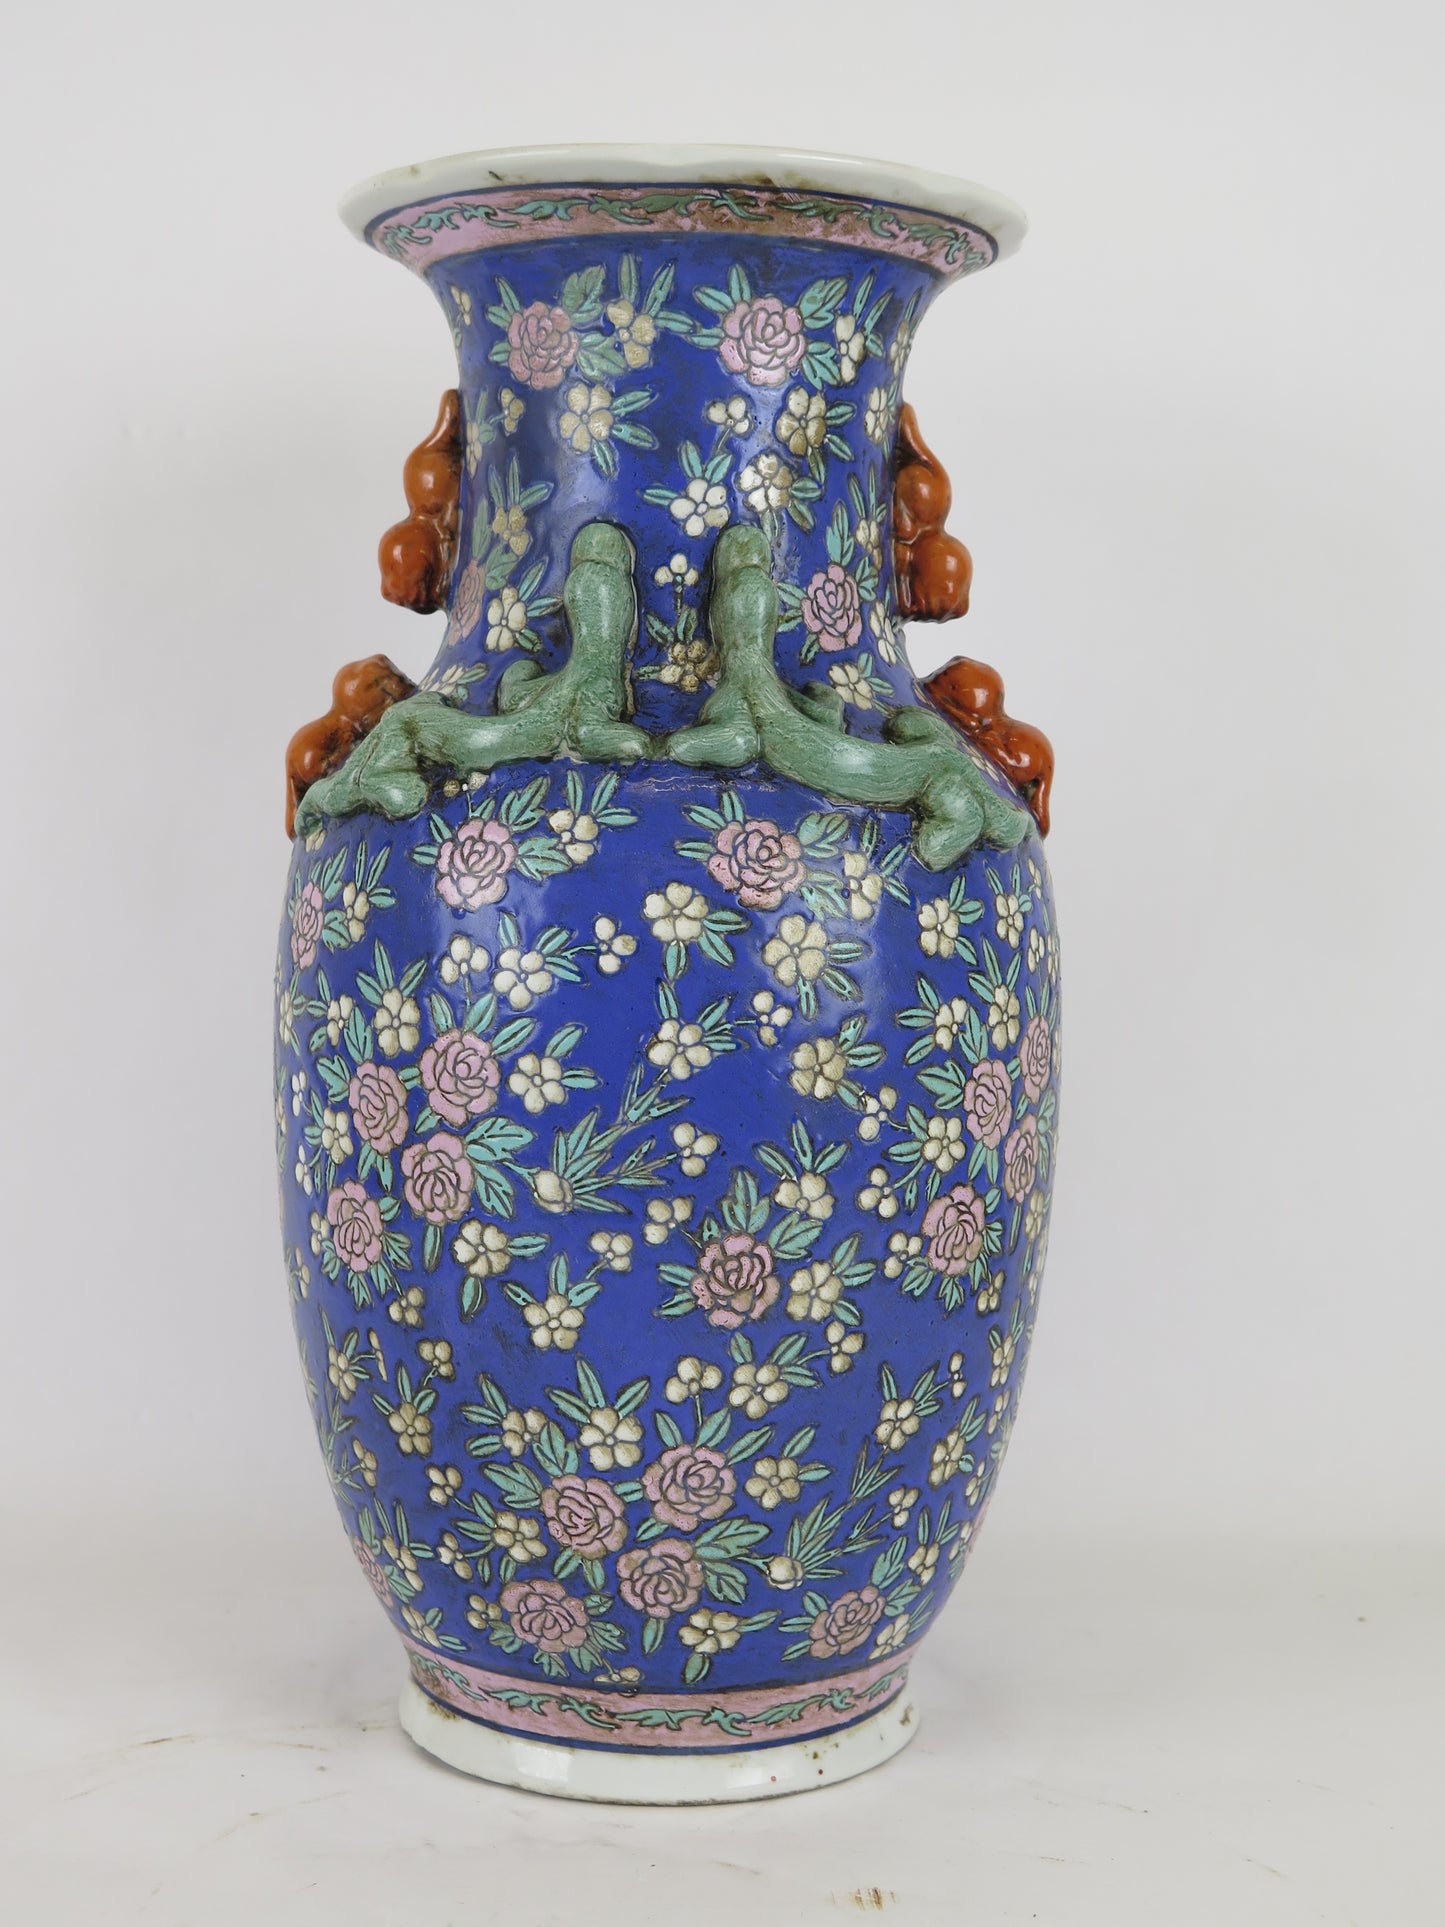 Hand-painted ceramic vase China 1900s Asia Chinese vintage floral art CM3